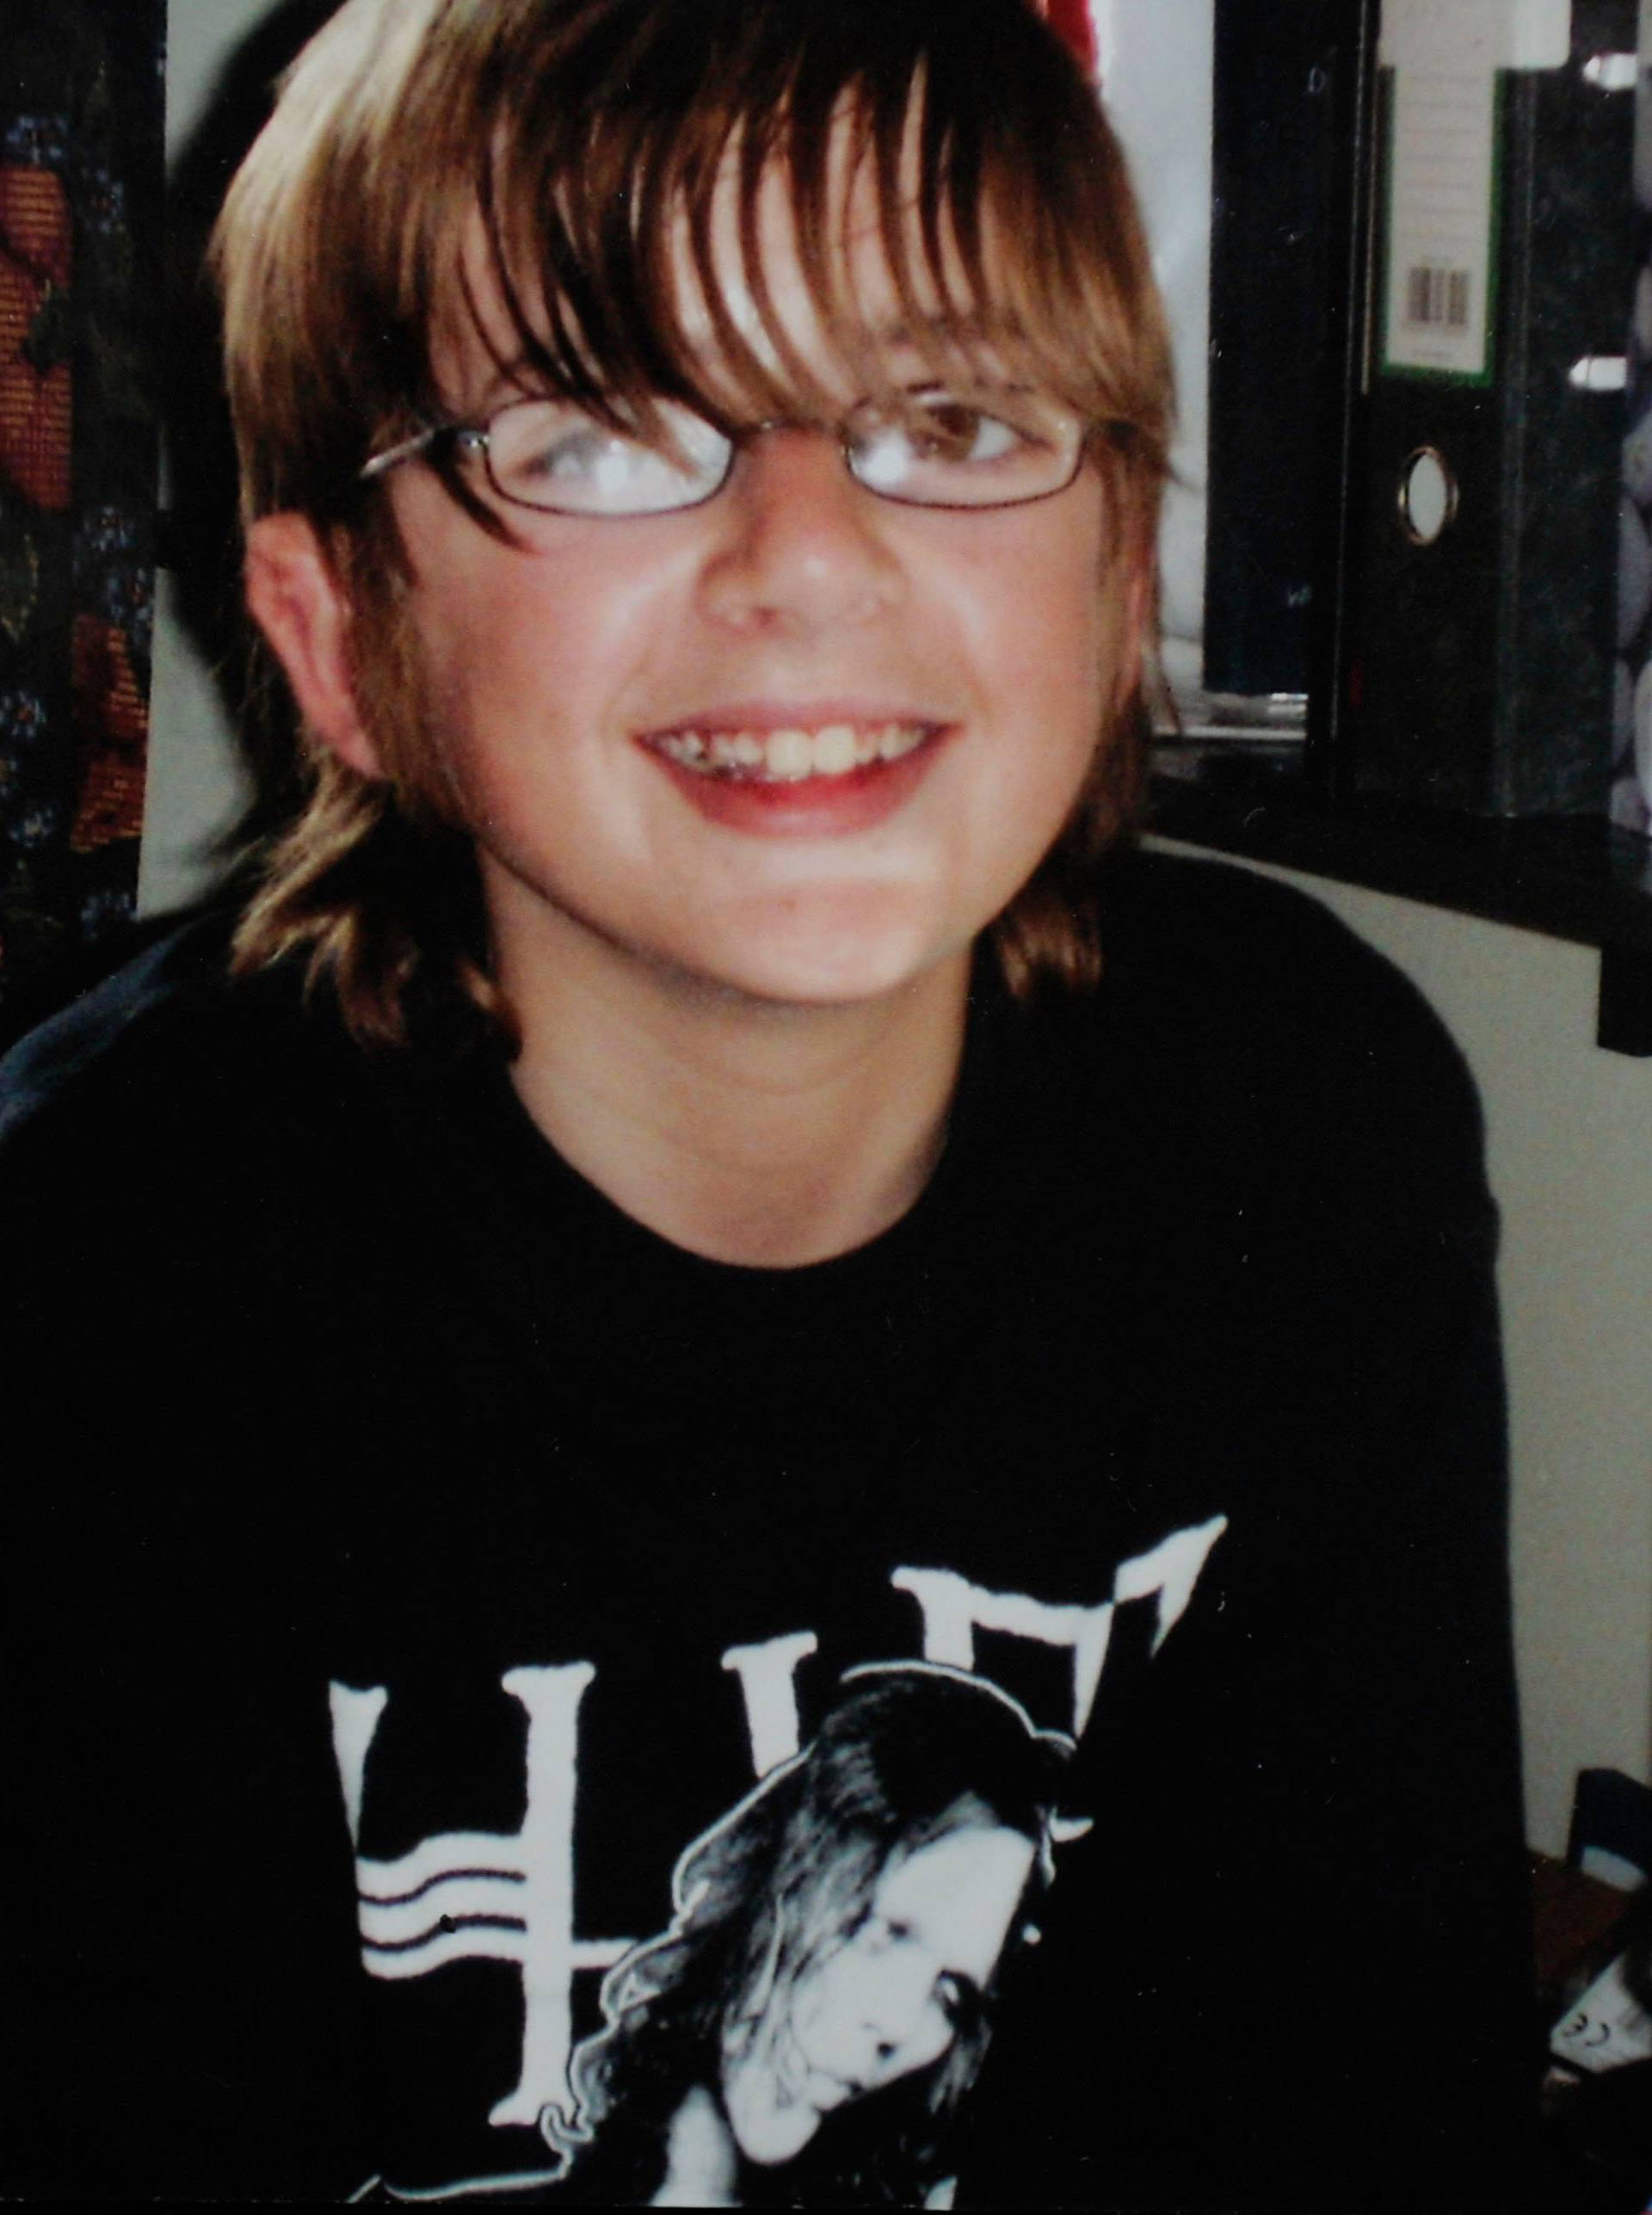 Collect photo of Andrew Gosden (14) who went missing in London.